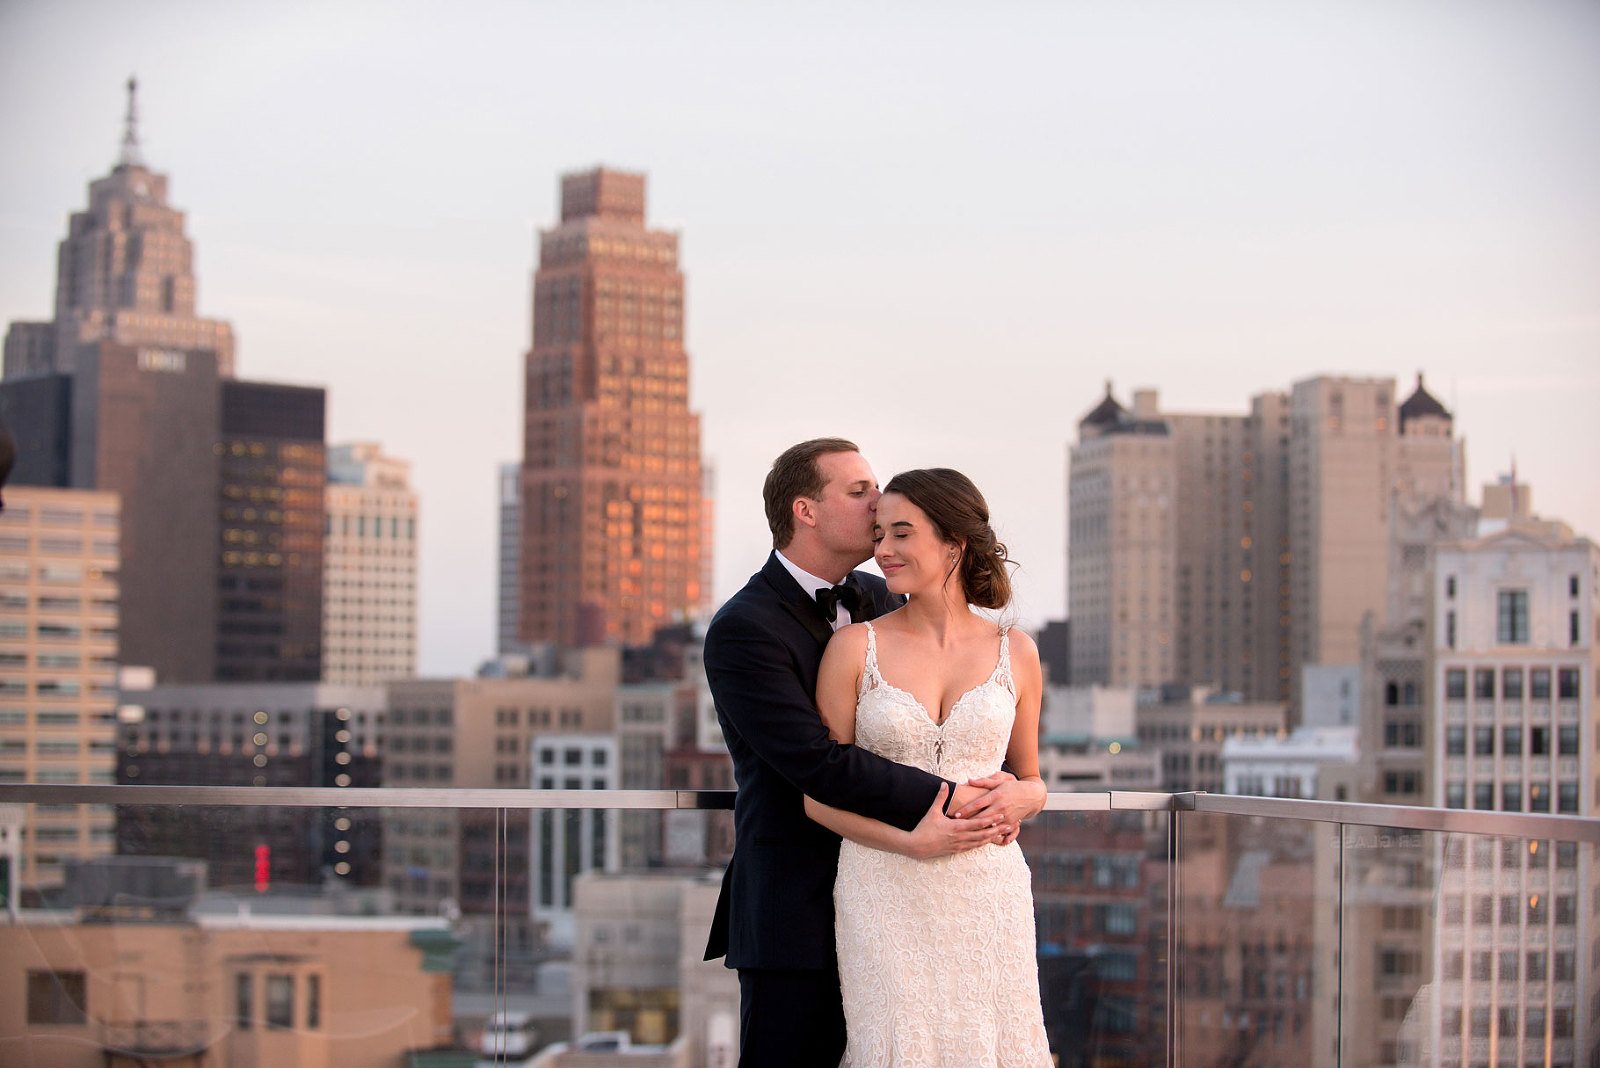 A bride and groom embrace on the balcony of the Detroit Athletic Club at sunset